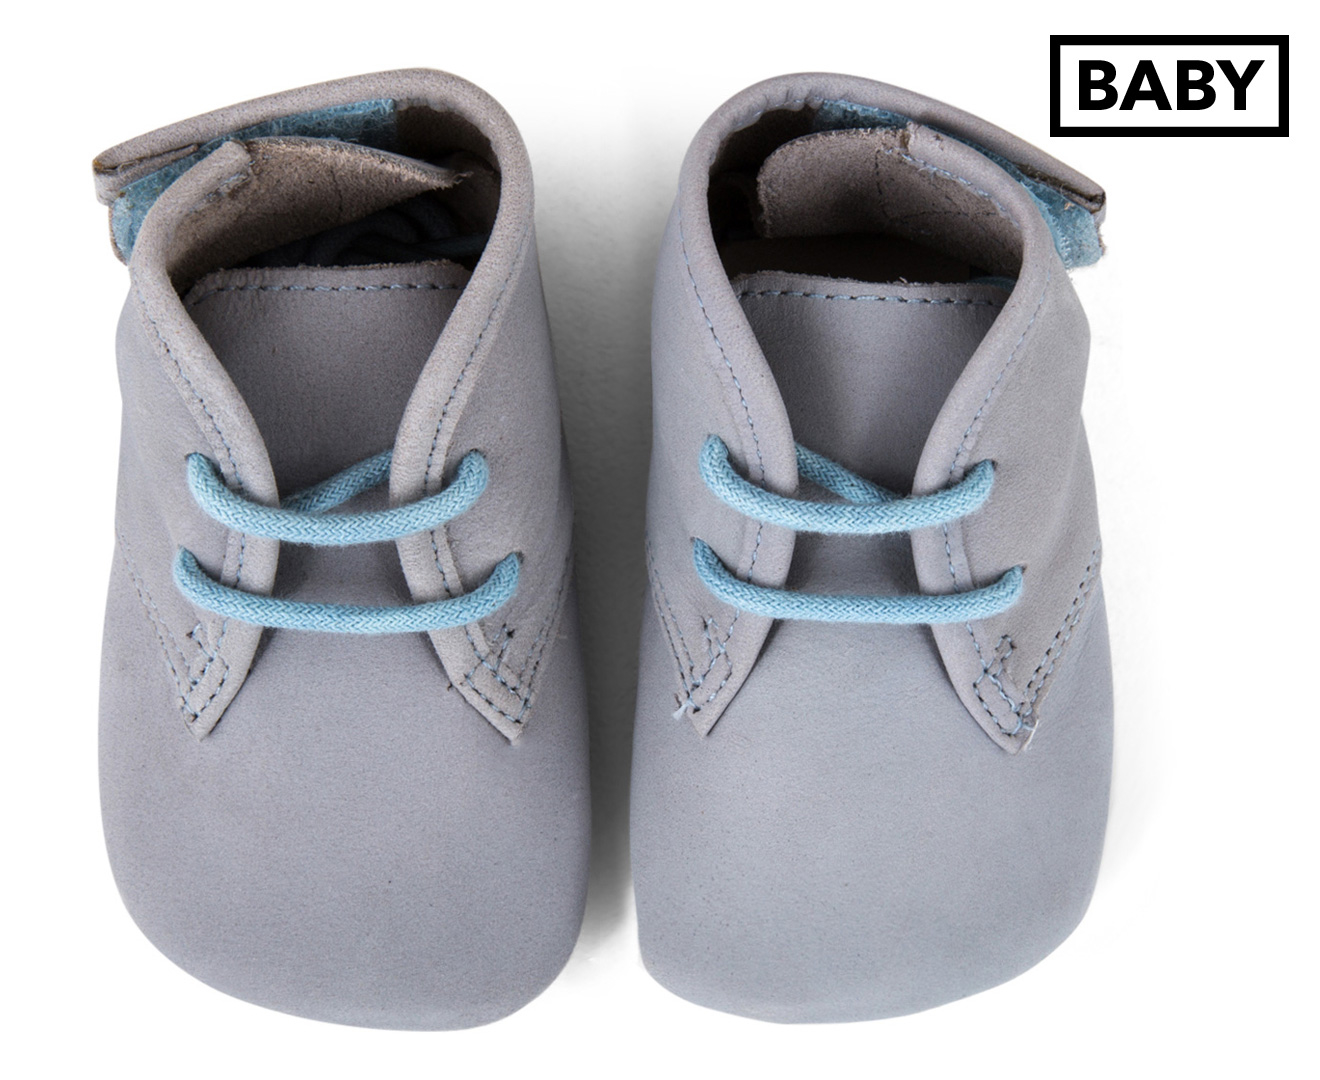 Clarks Baby Warm Leather Shoe - Pale Blue